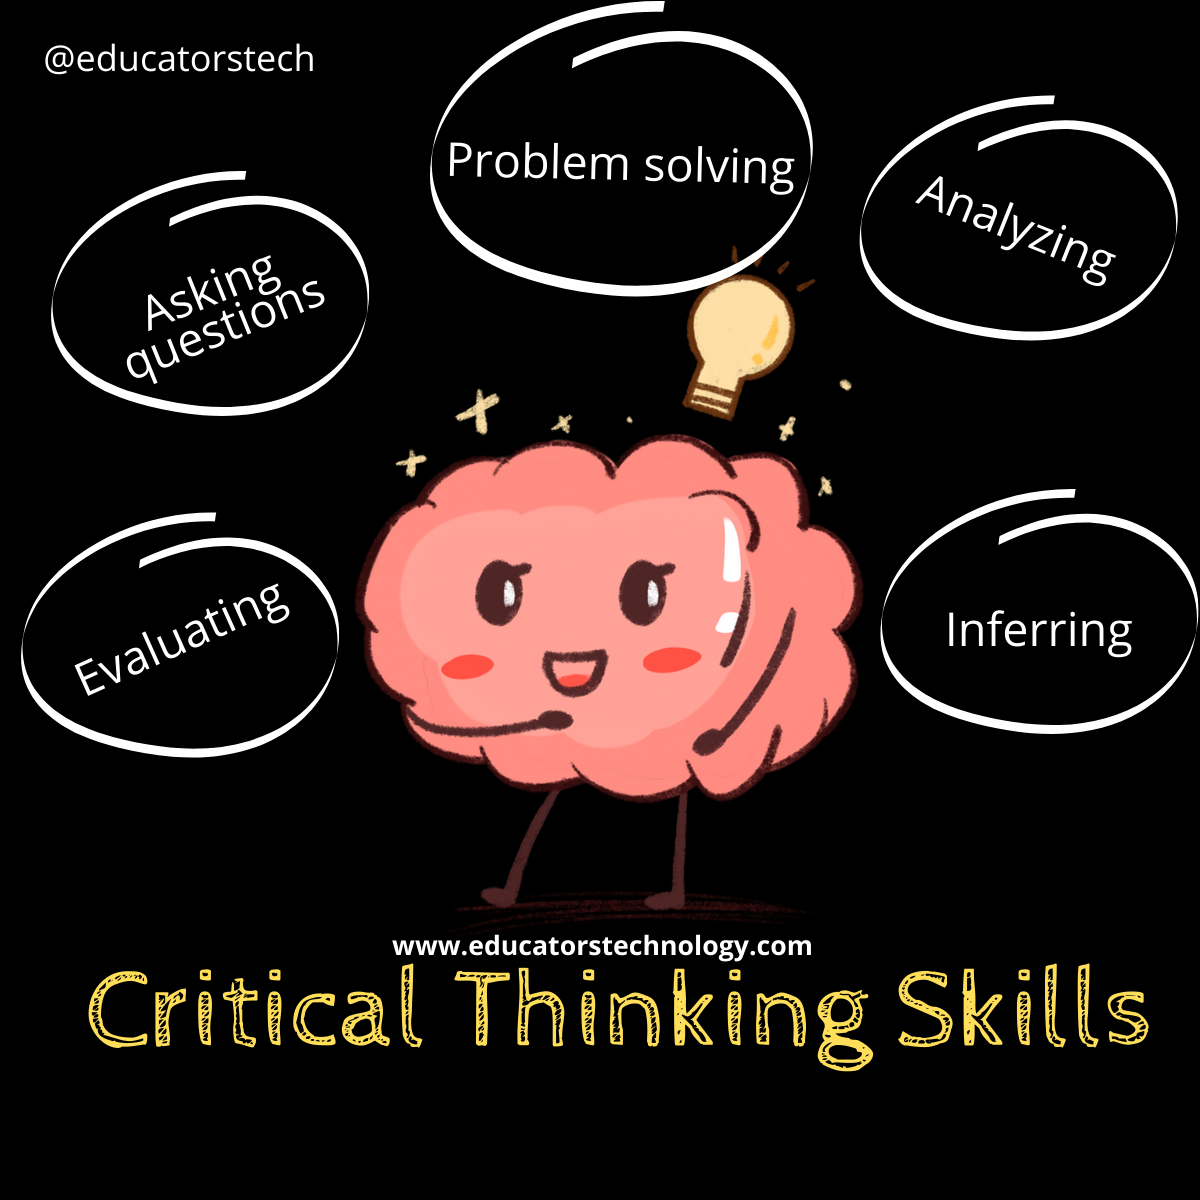 what are the two main components of critical thinking